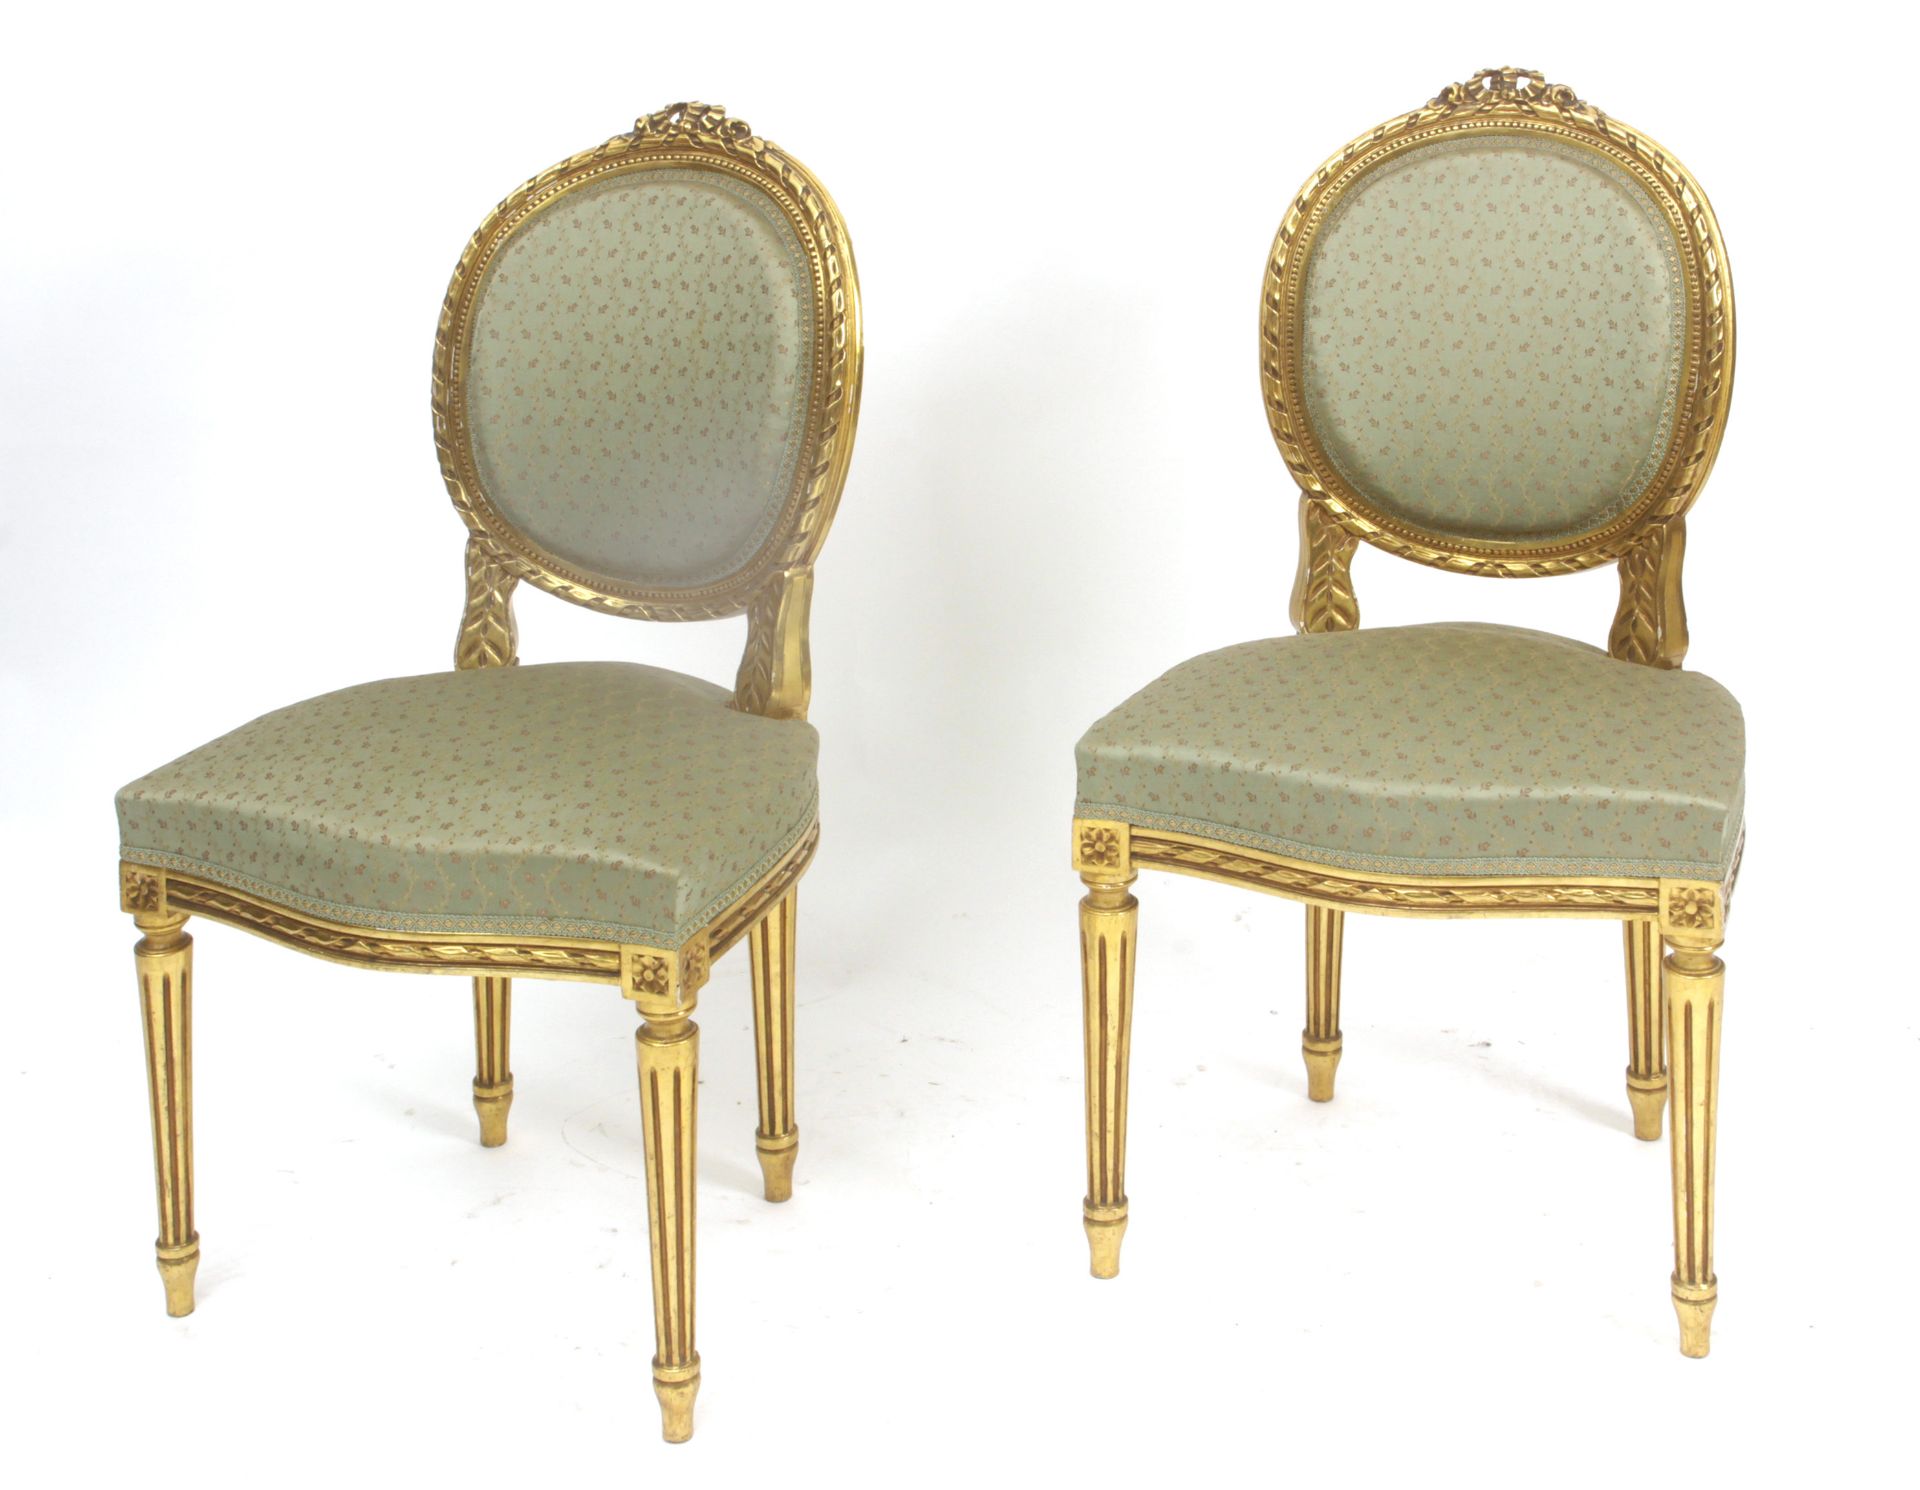 A pair of 19th century Louis XV chairs